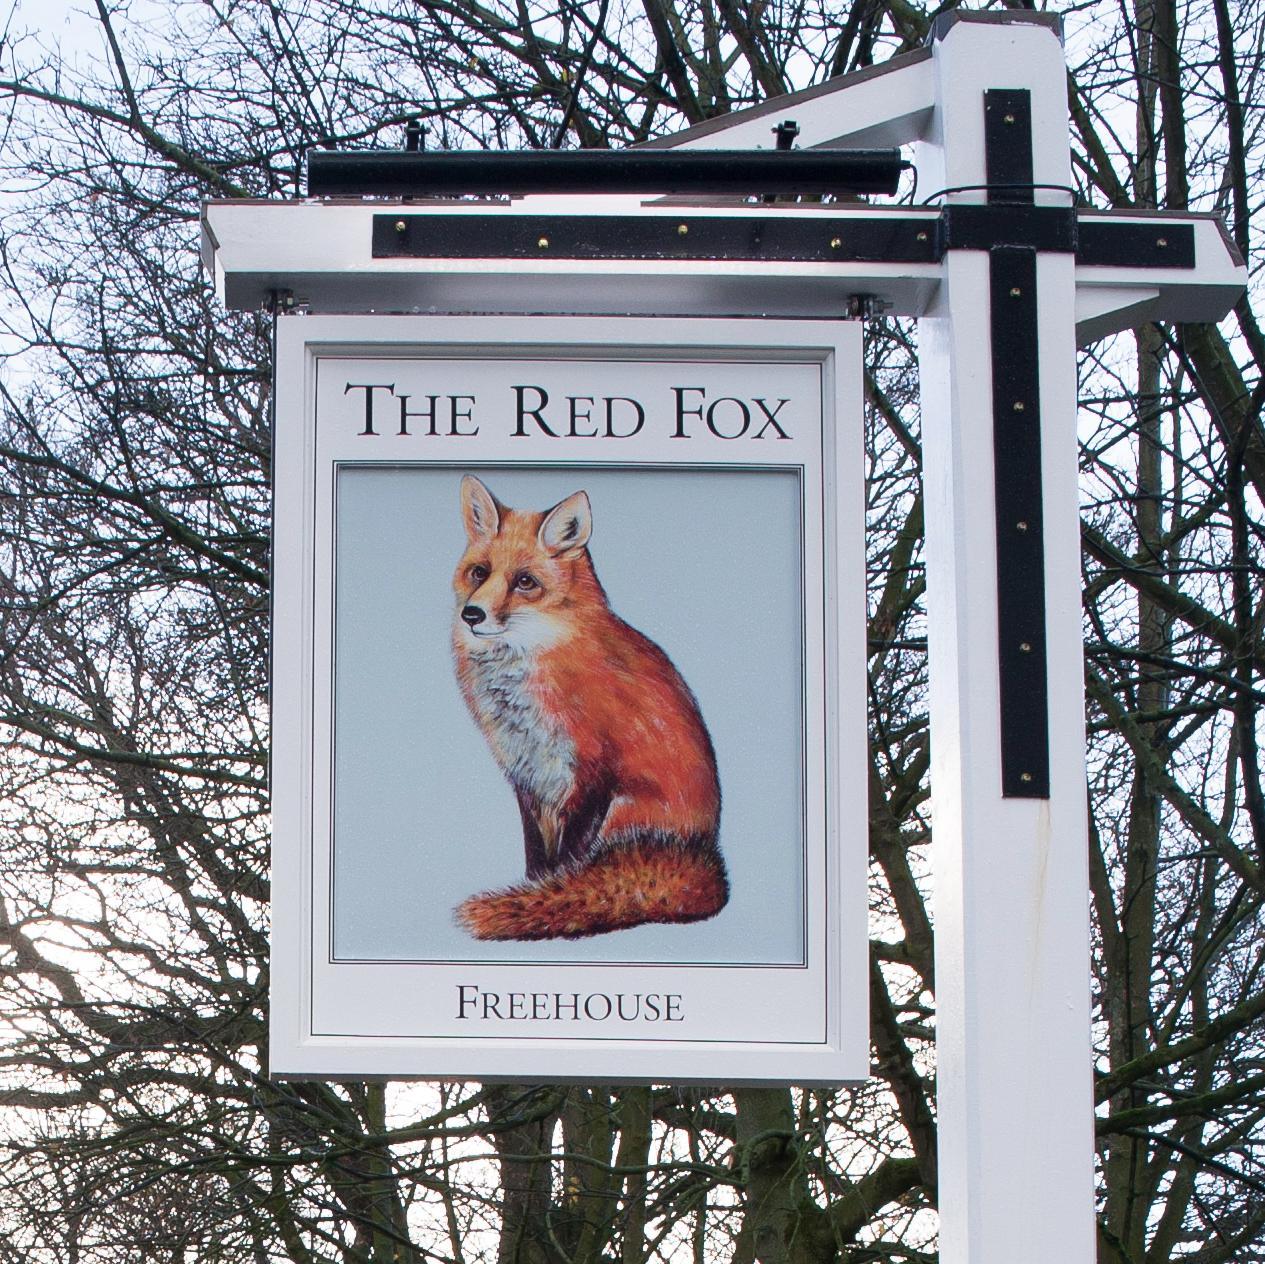 Red fox twitter the Red Fox